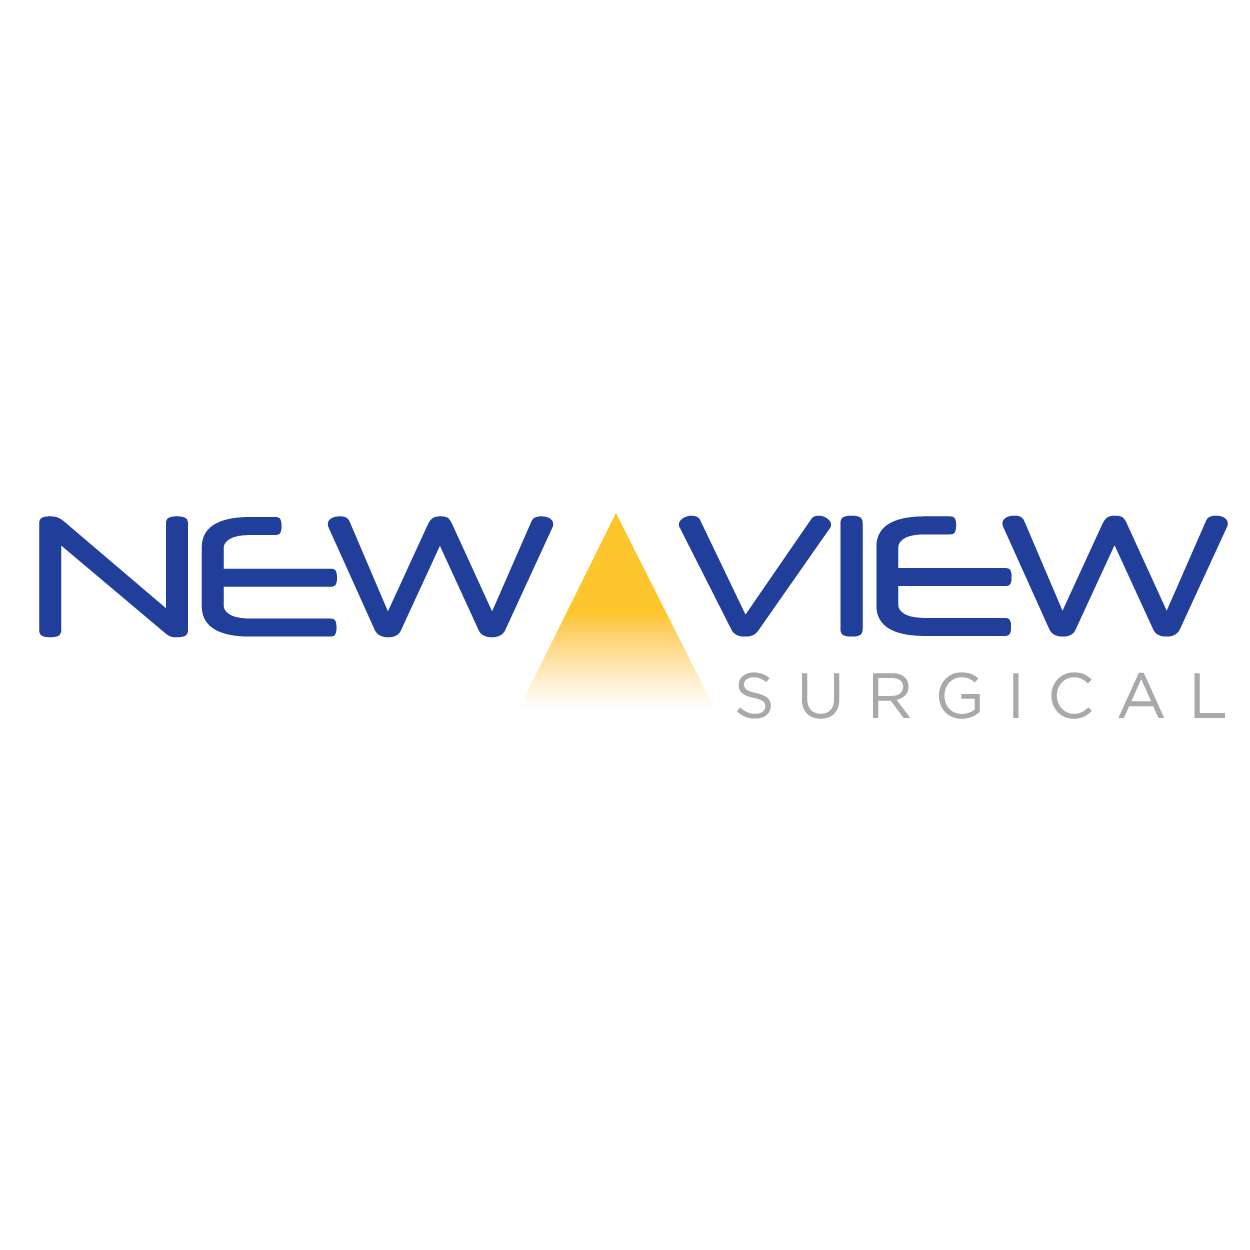 New View Surgical, Inc.